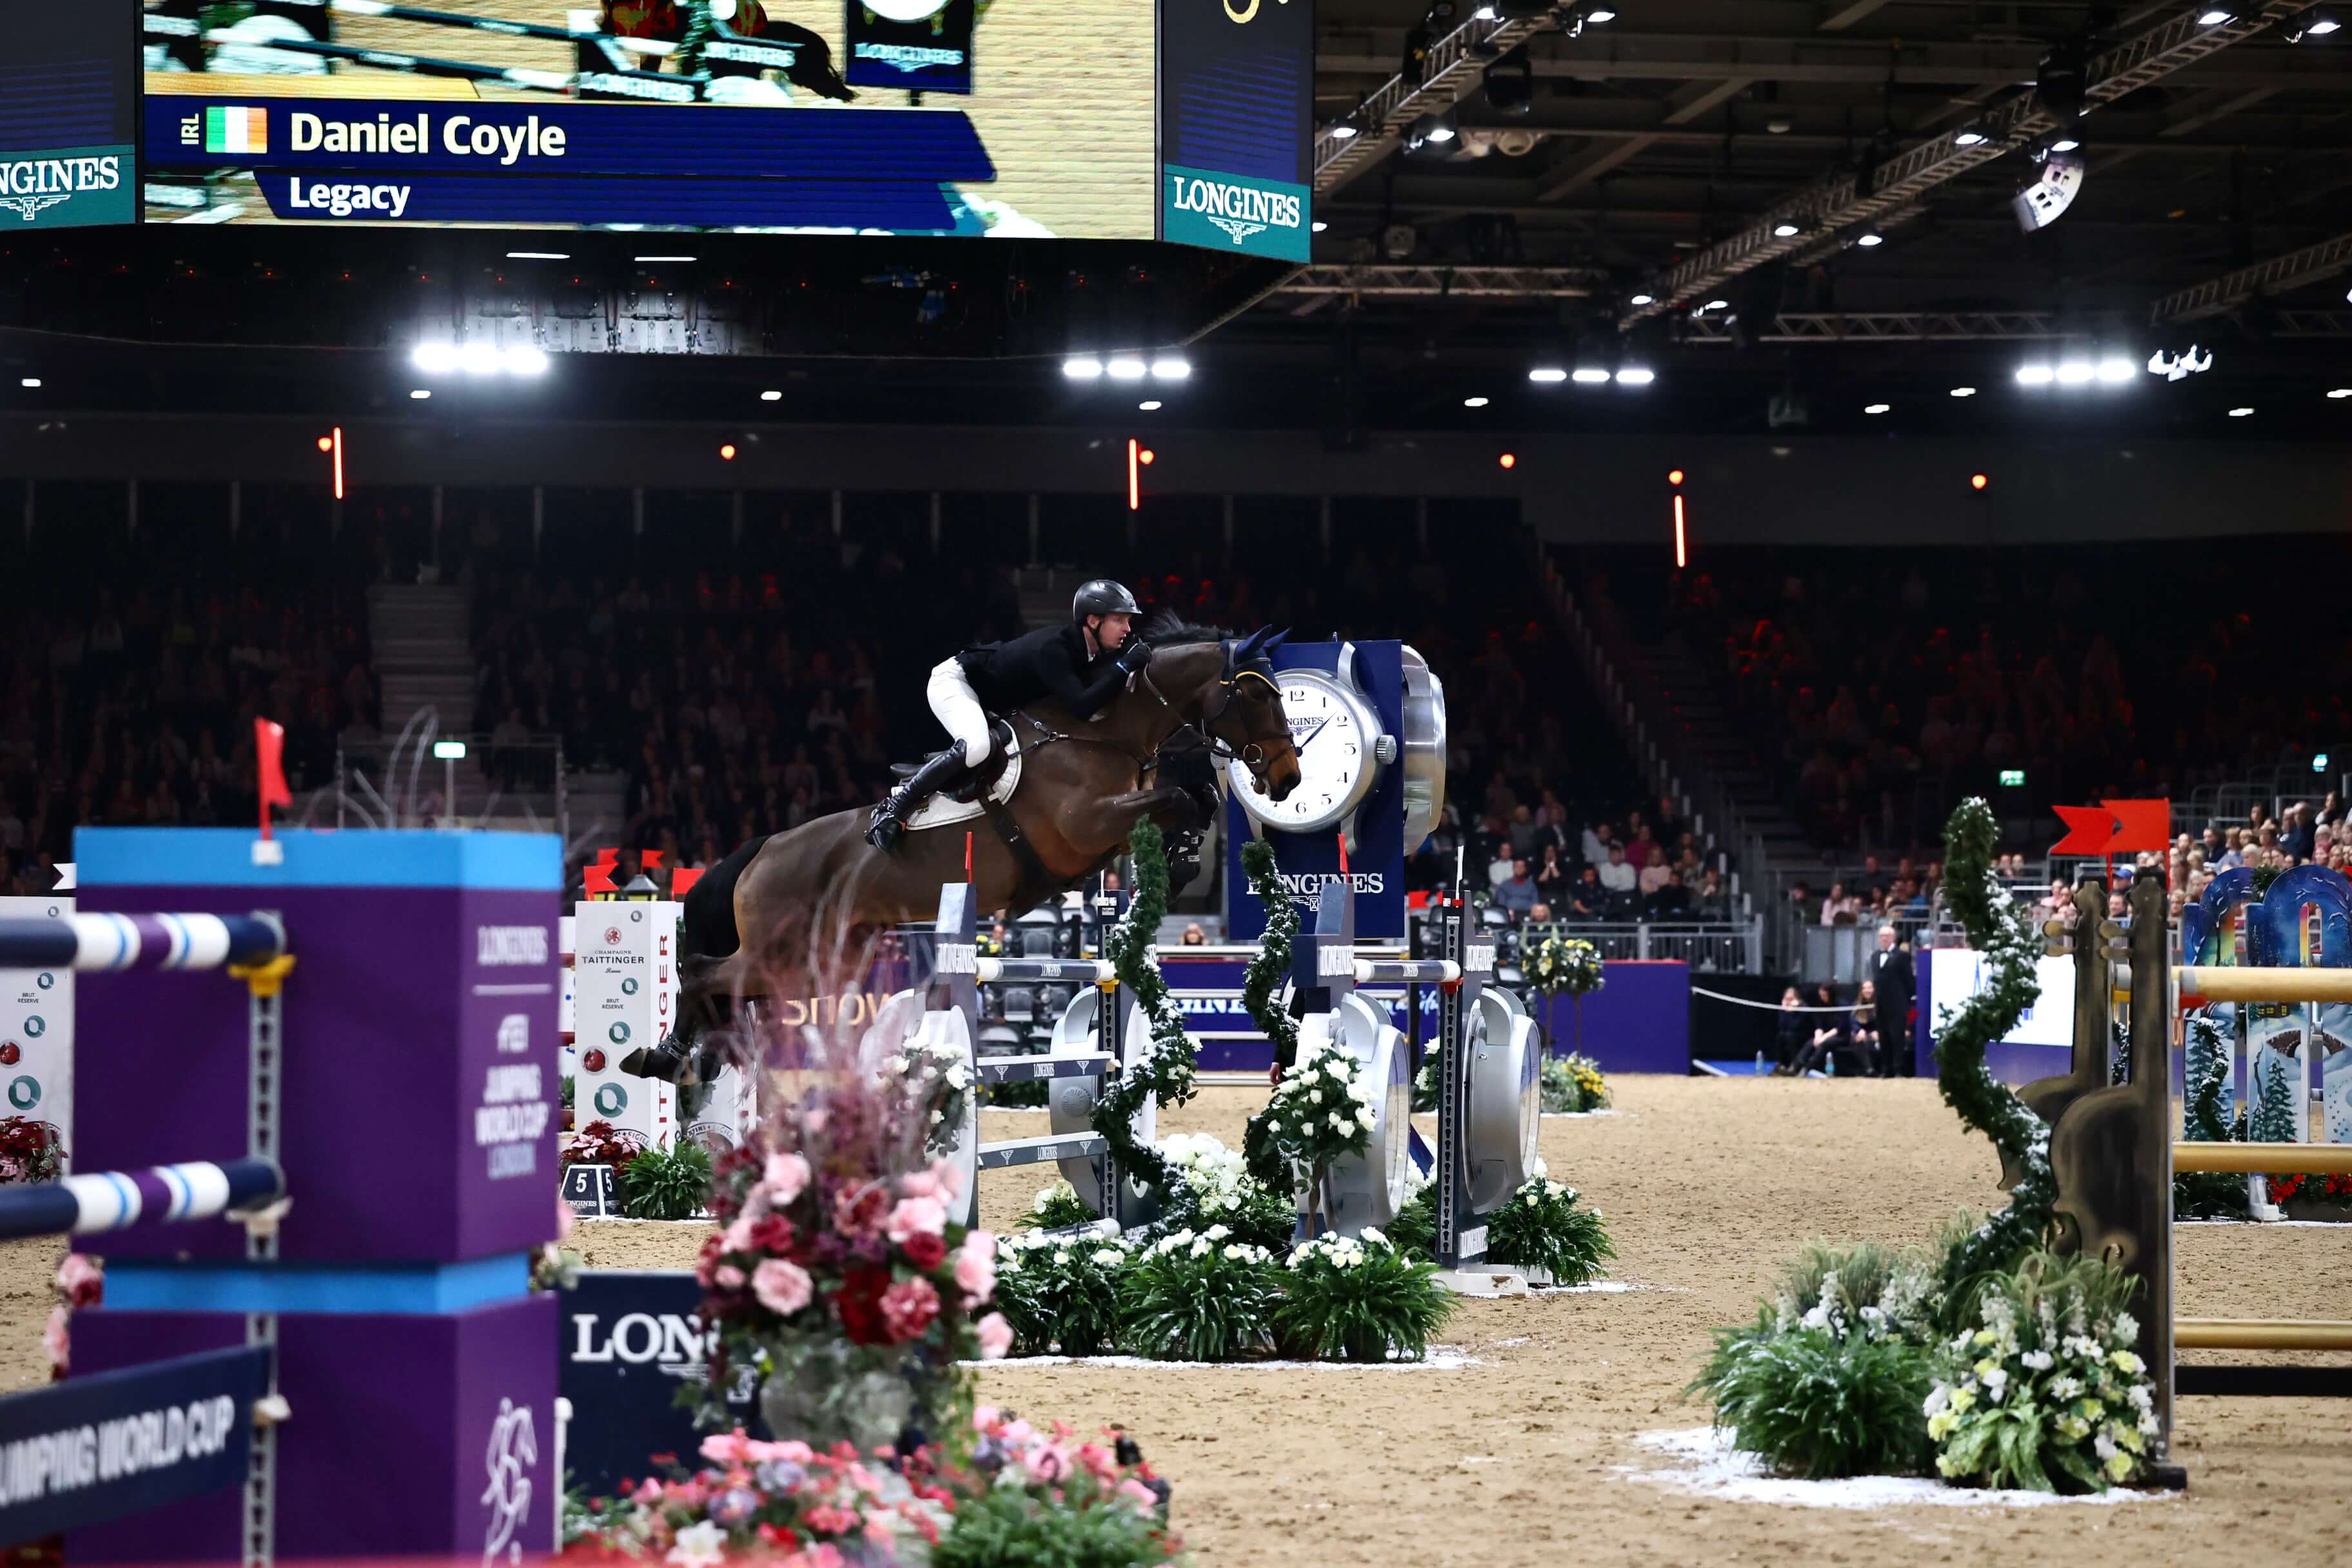 Daniel Cyole and Legacy close their first London Horse Show with victory in the Grand Prix